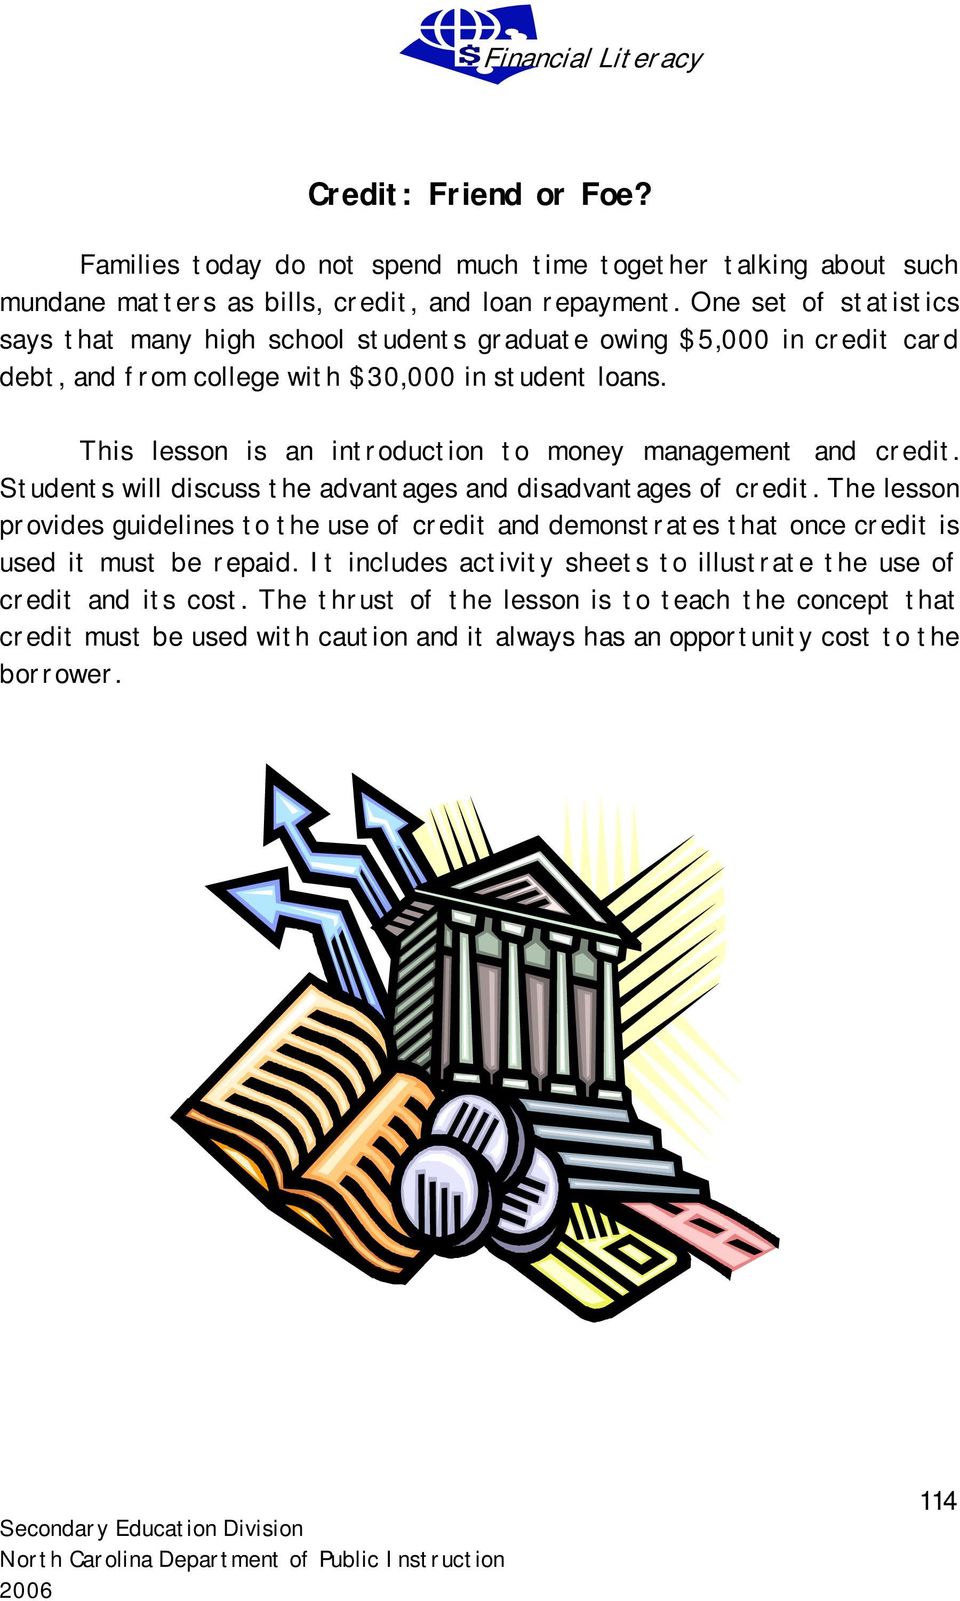 This lesson is an introduction to money management and credit. Students will discuss the advantages and disadvantages of credit.